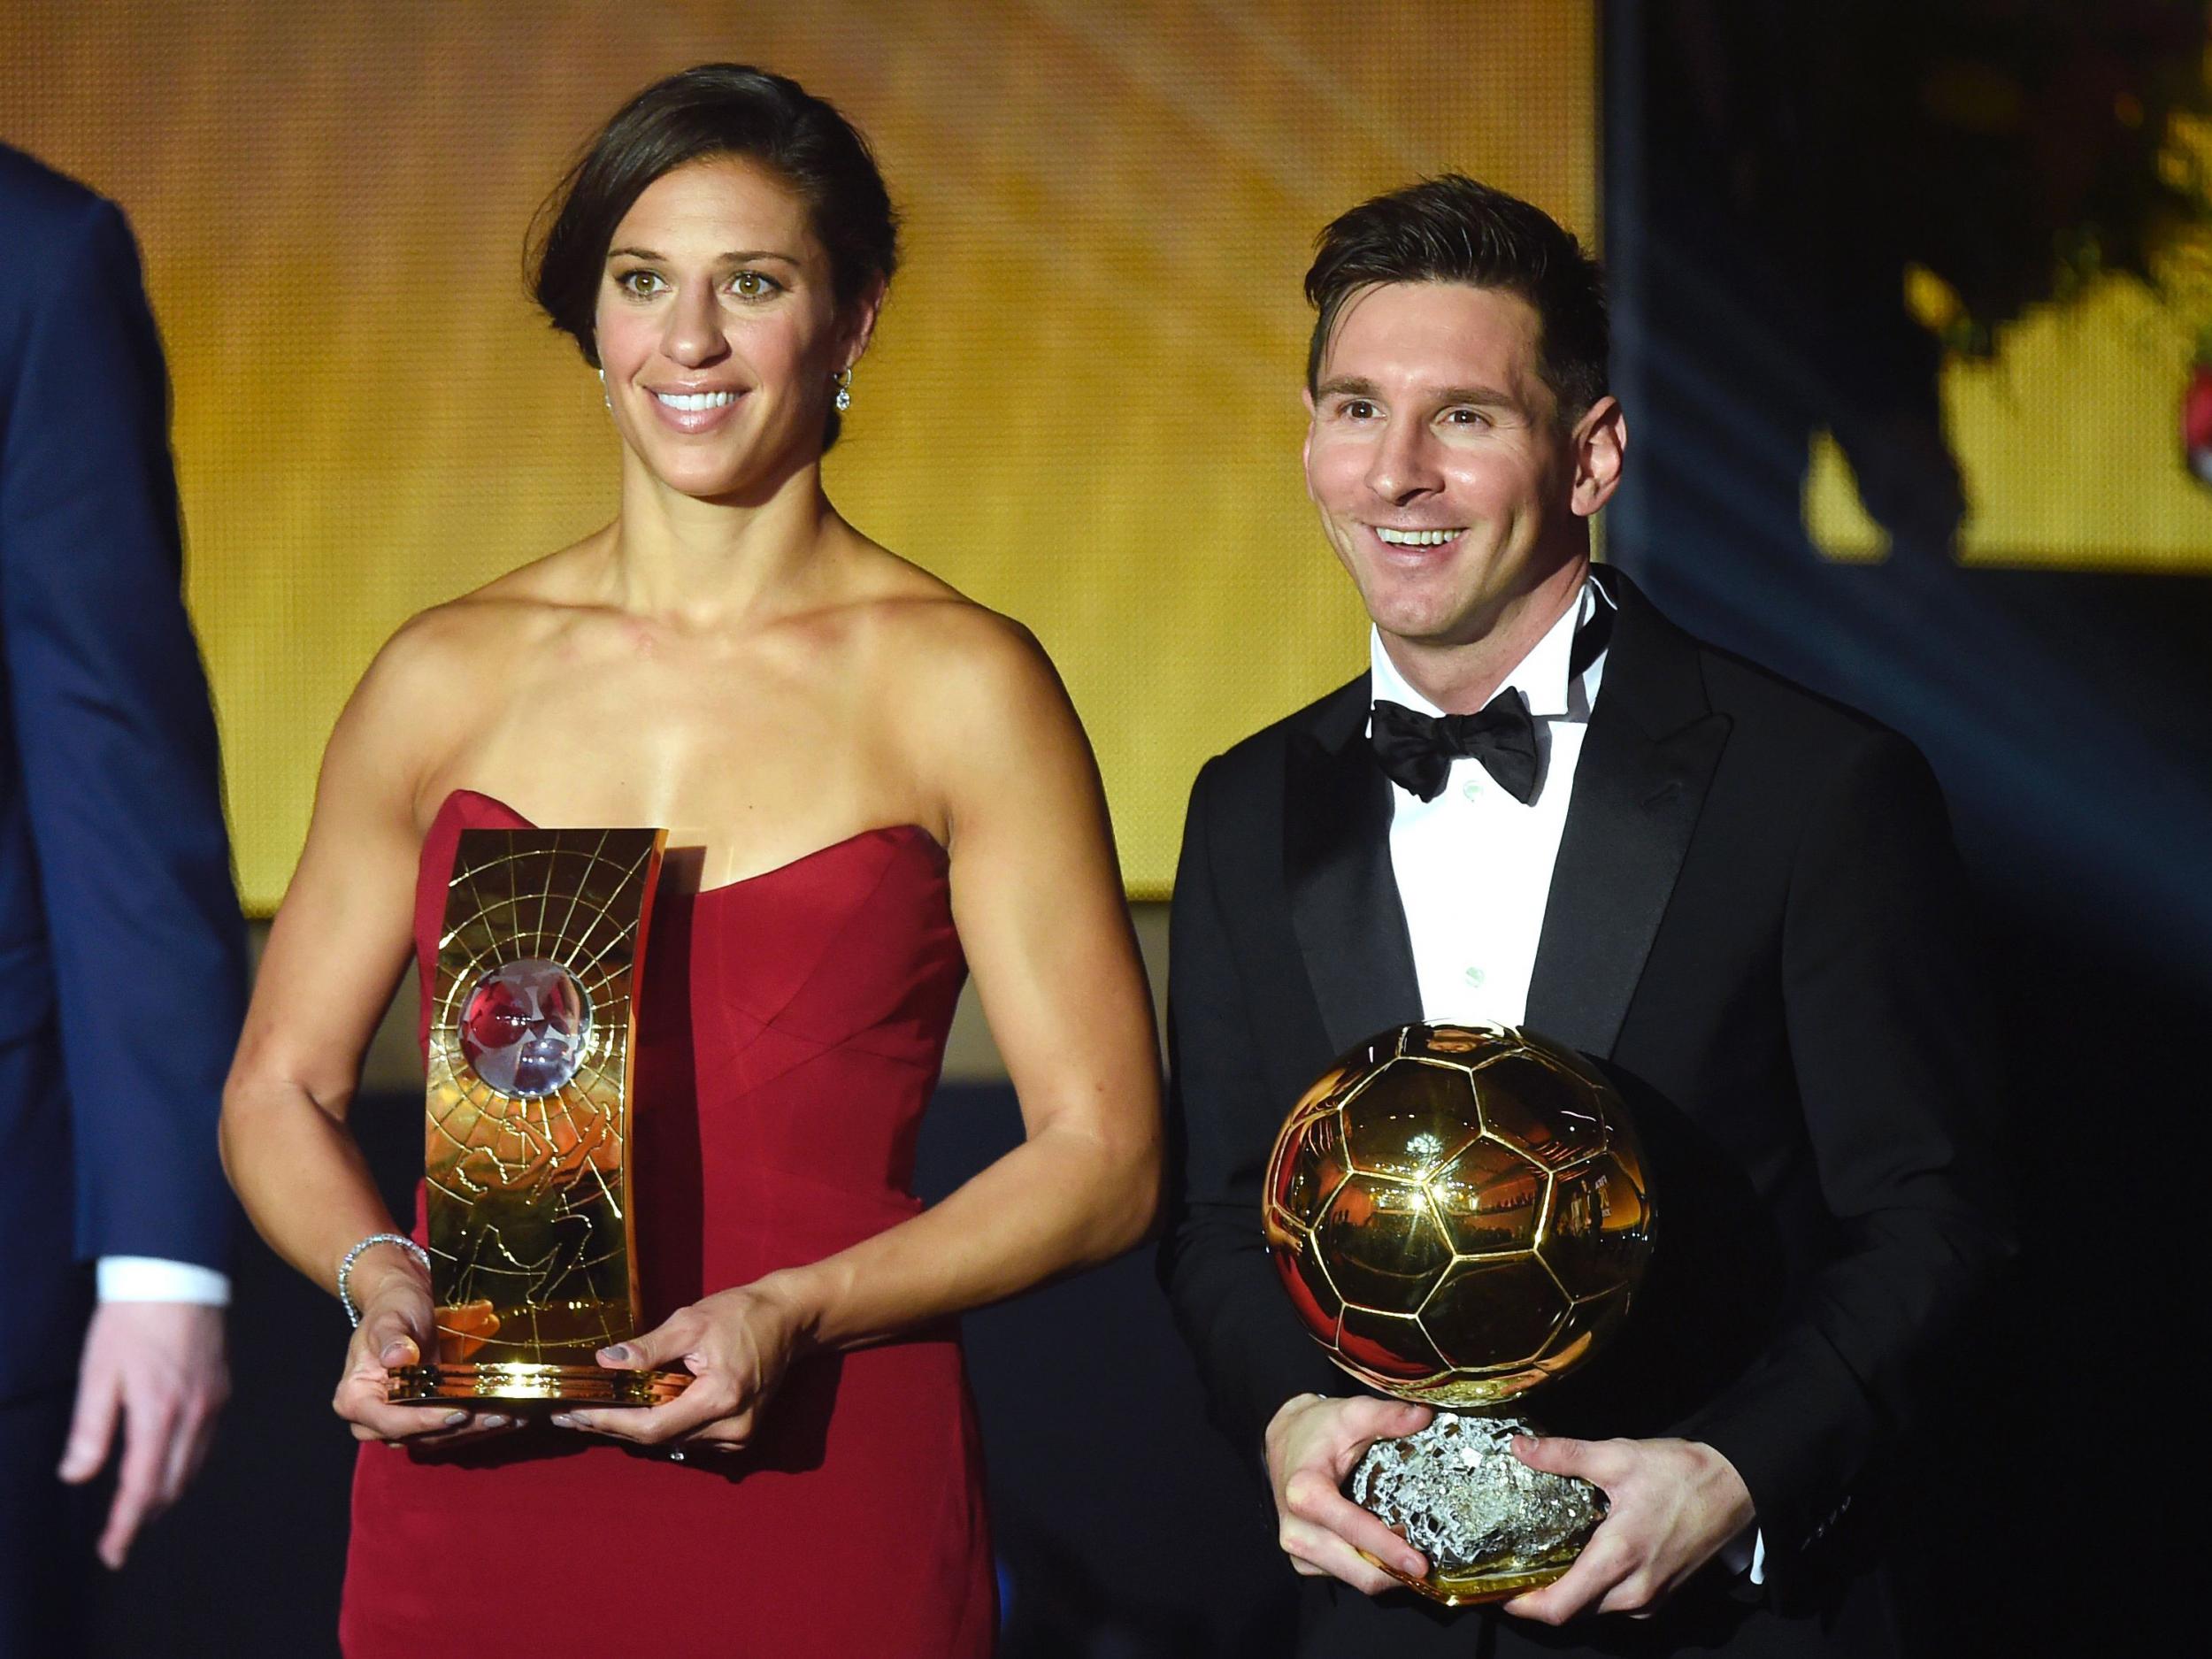 Carli Lloyd and Lionel Messi were the winners of the women's and men's awards last year